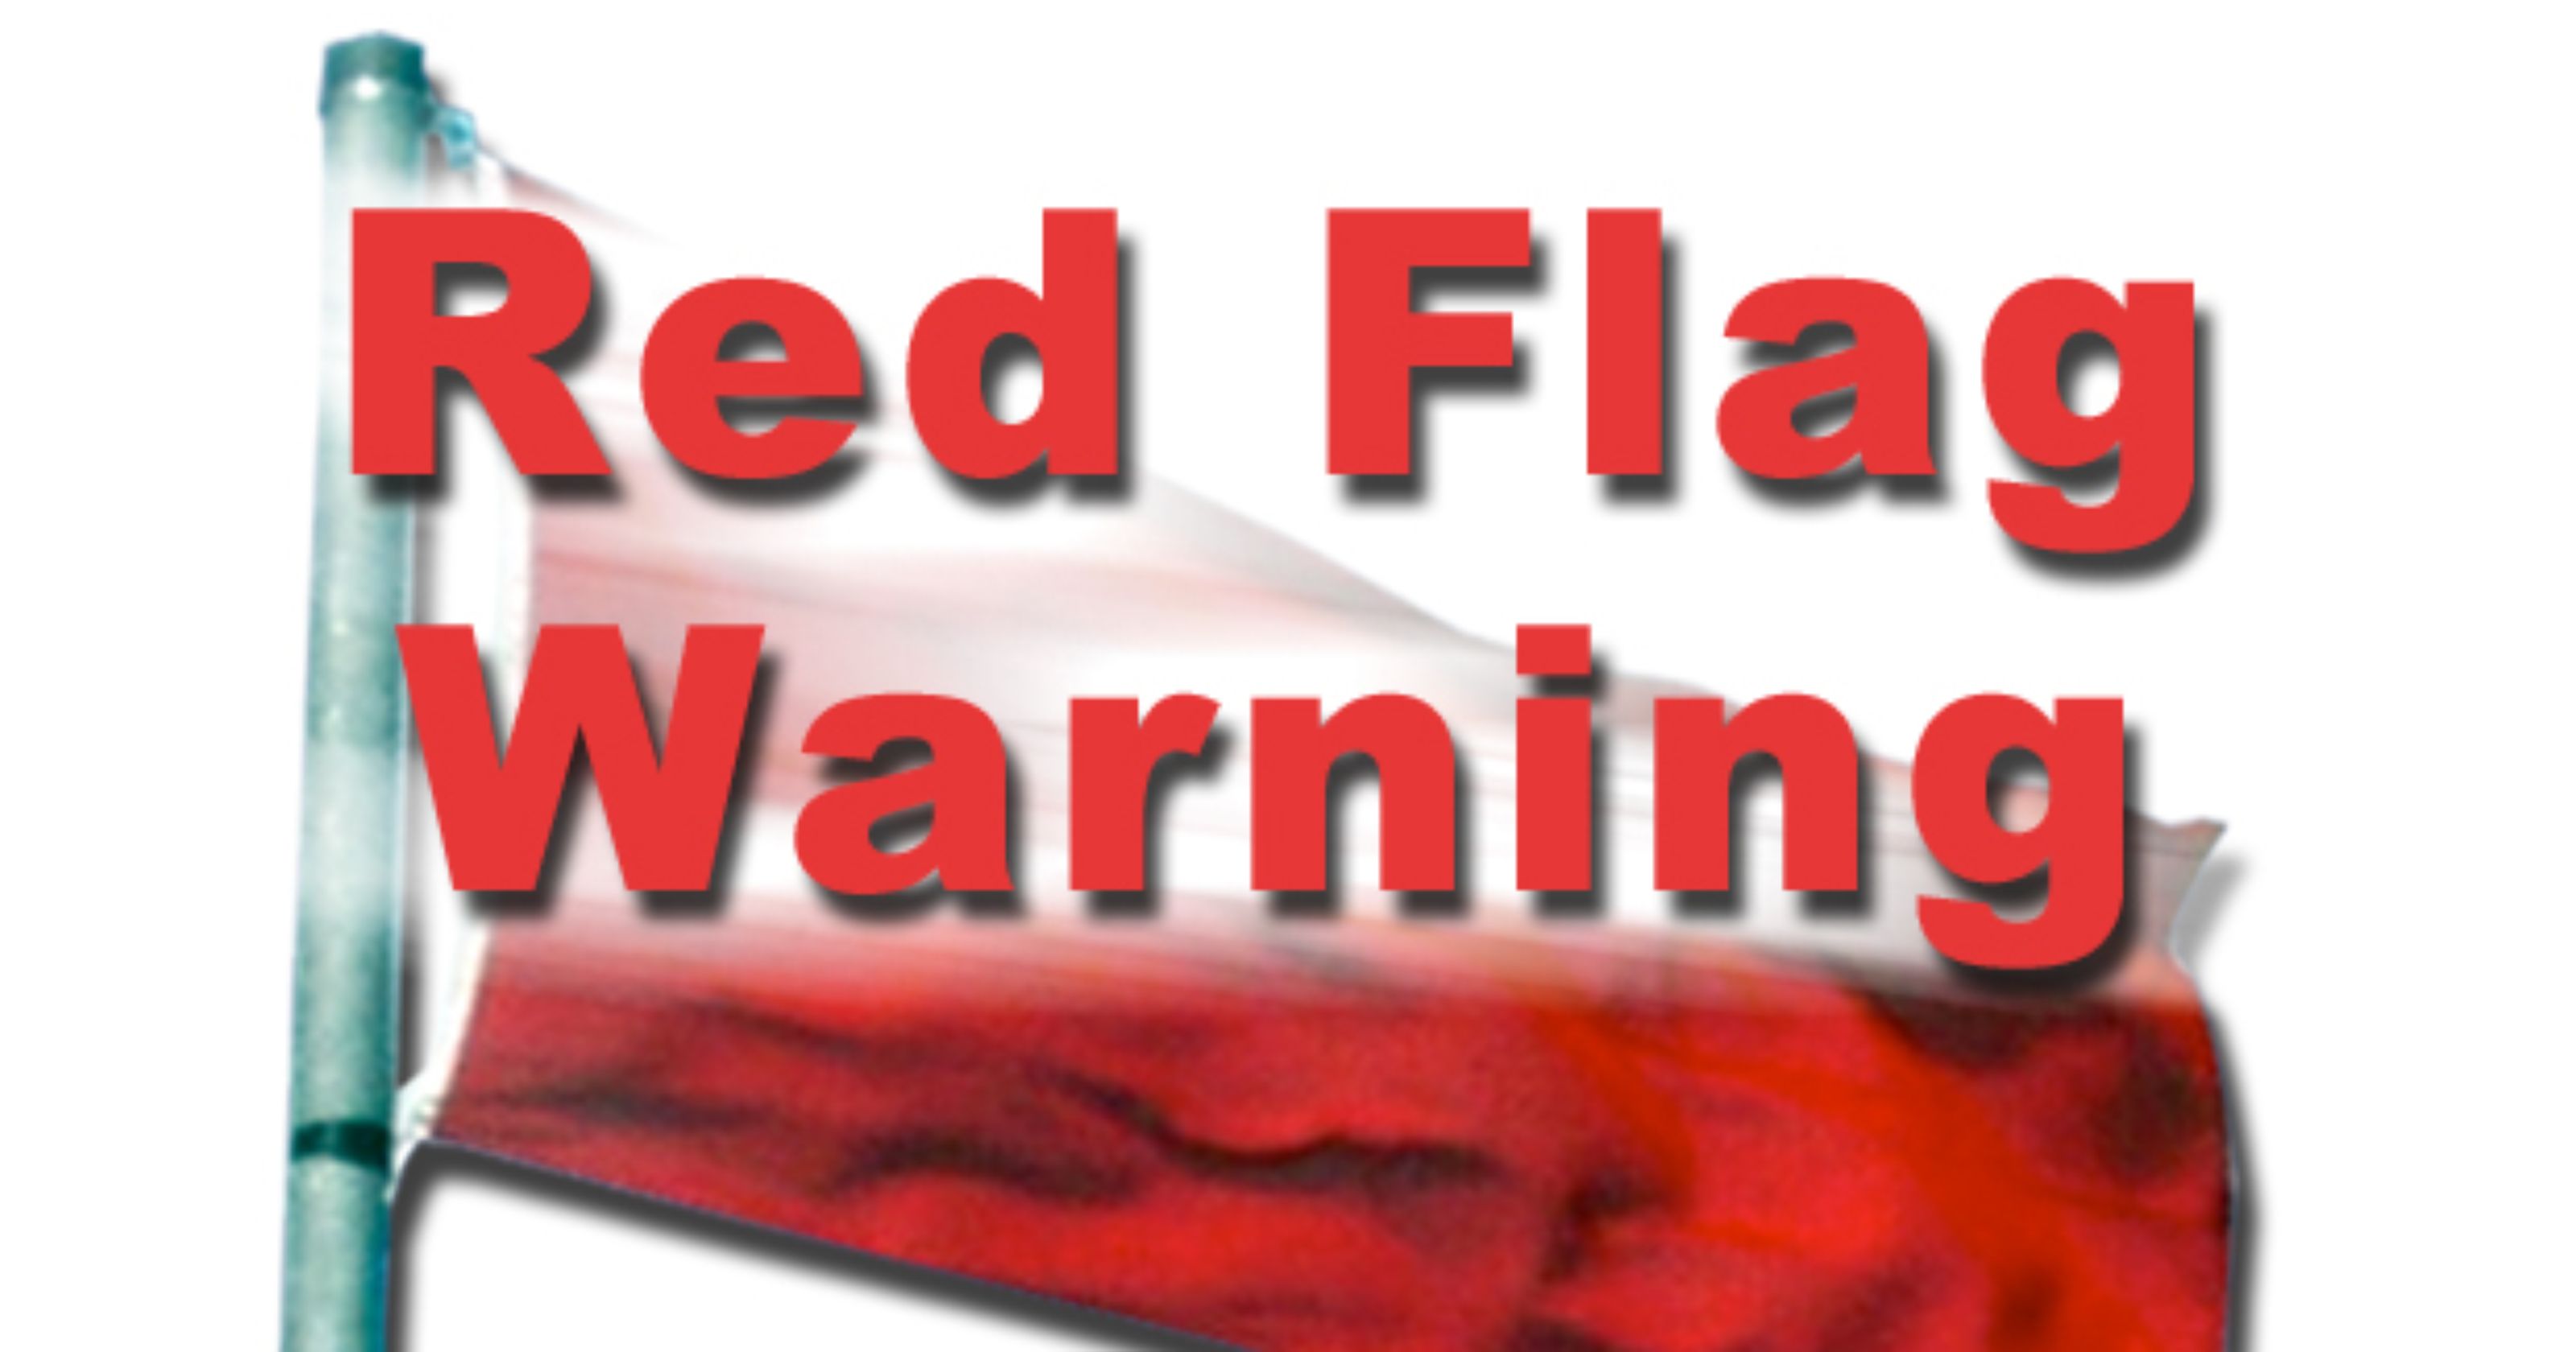 High winds and dry weather prompts red flag warning